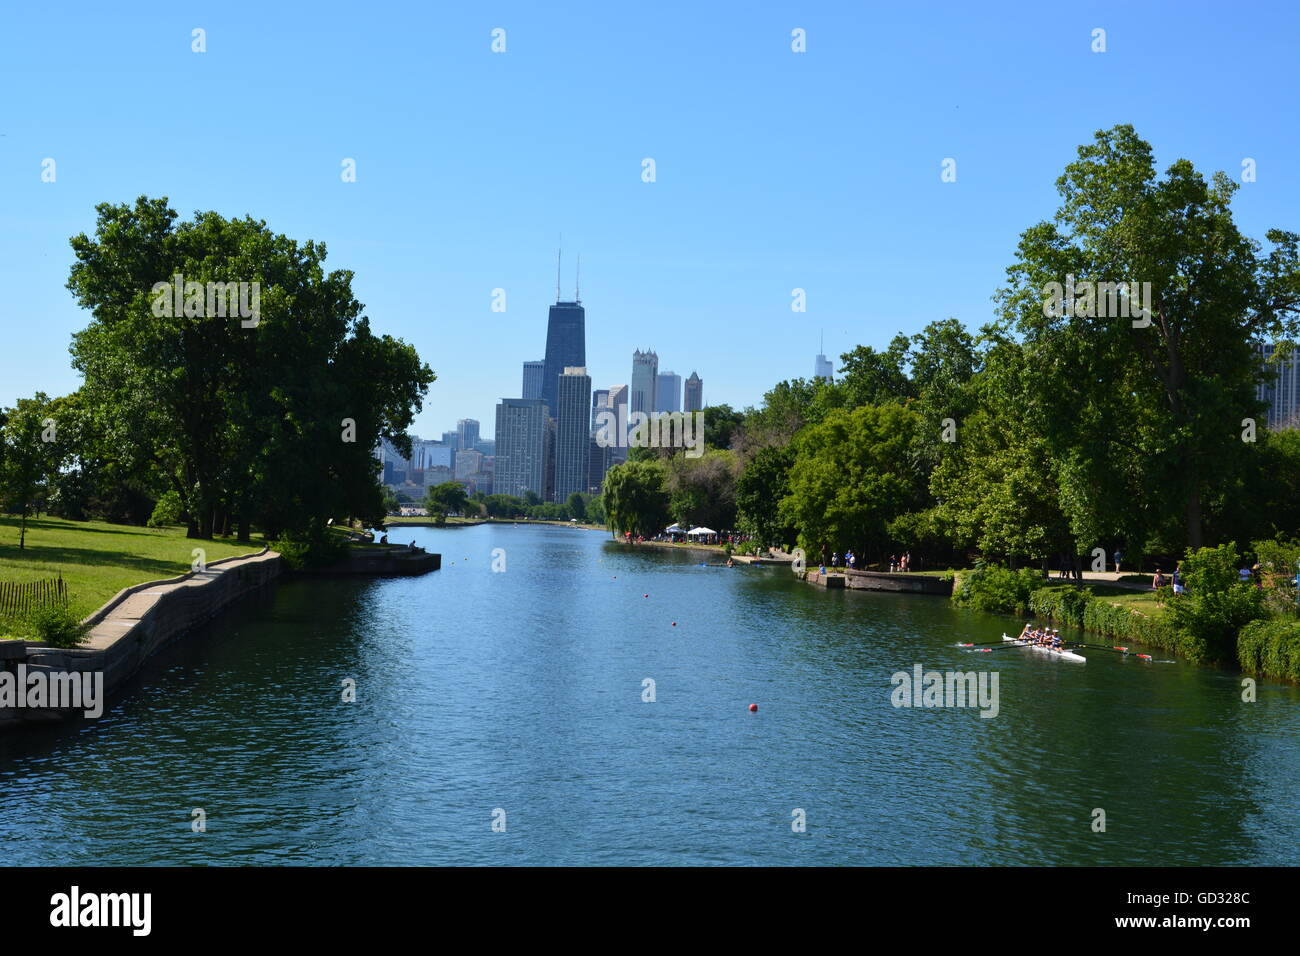 Boats race down the Lincoln Park Lagoon Henley style at the 36th annual running of the Chicago Sprints Regatta, July 9-10, 2016 Stock Photo